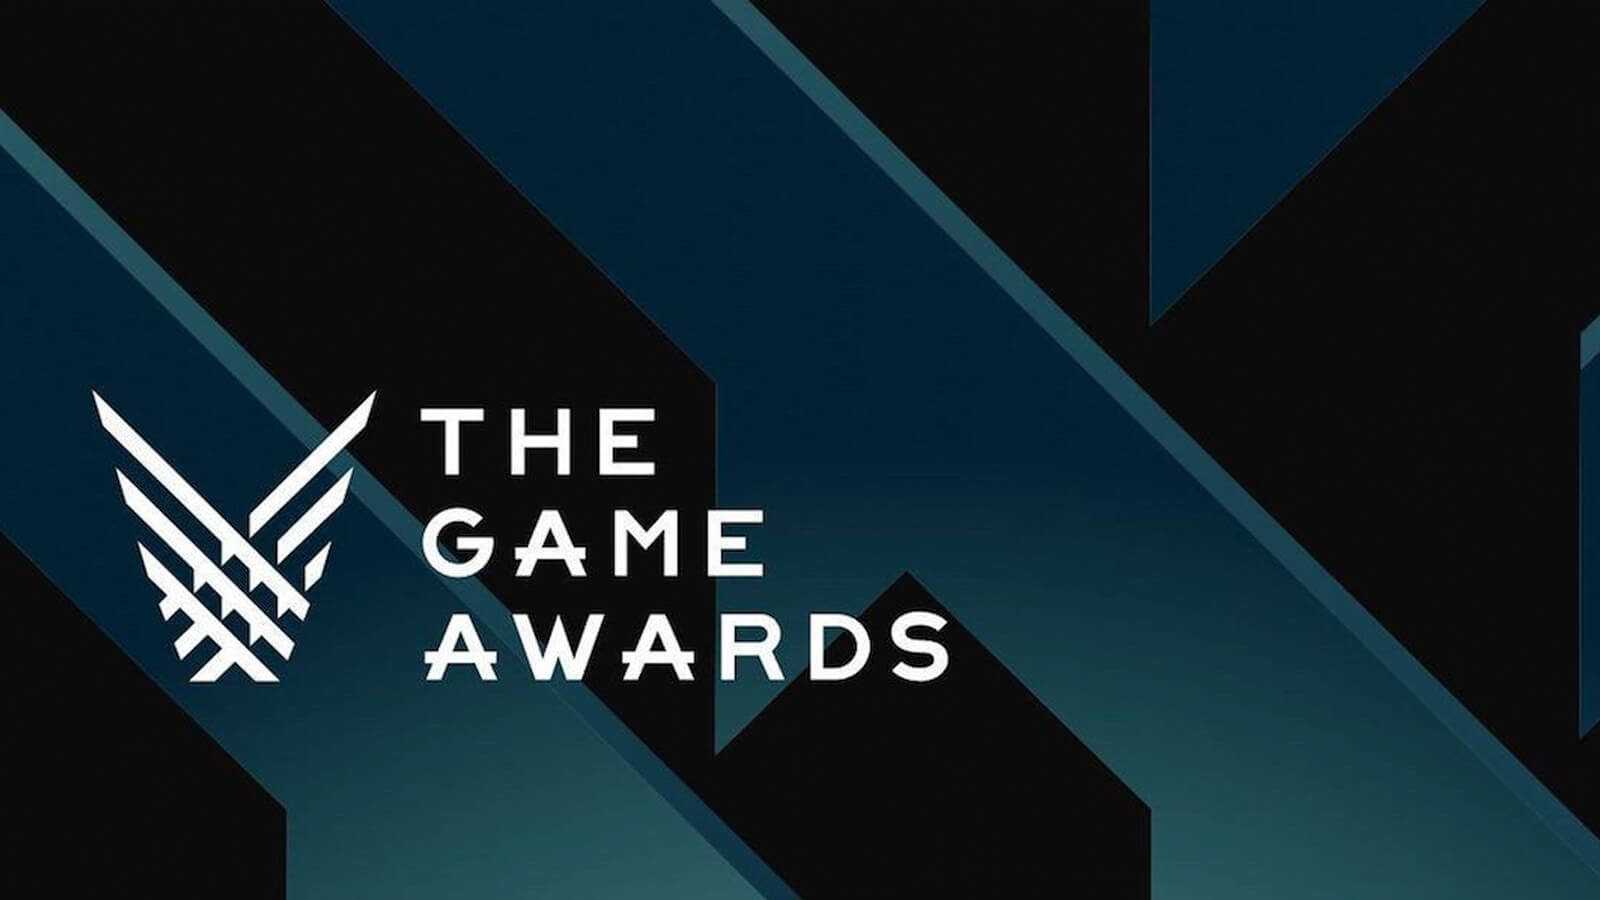 The Game Awards 2018: Full Sail Grads on Winning and Nominated Games